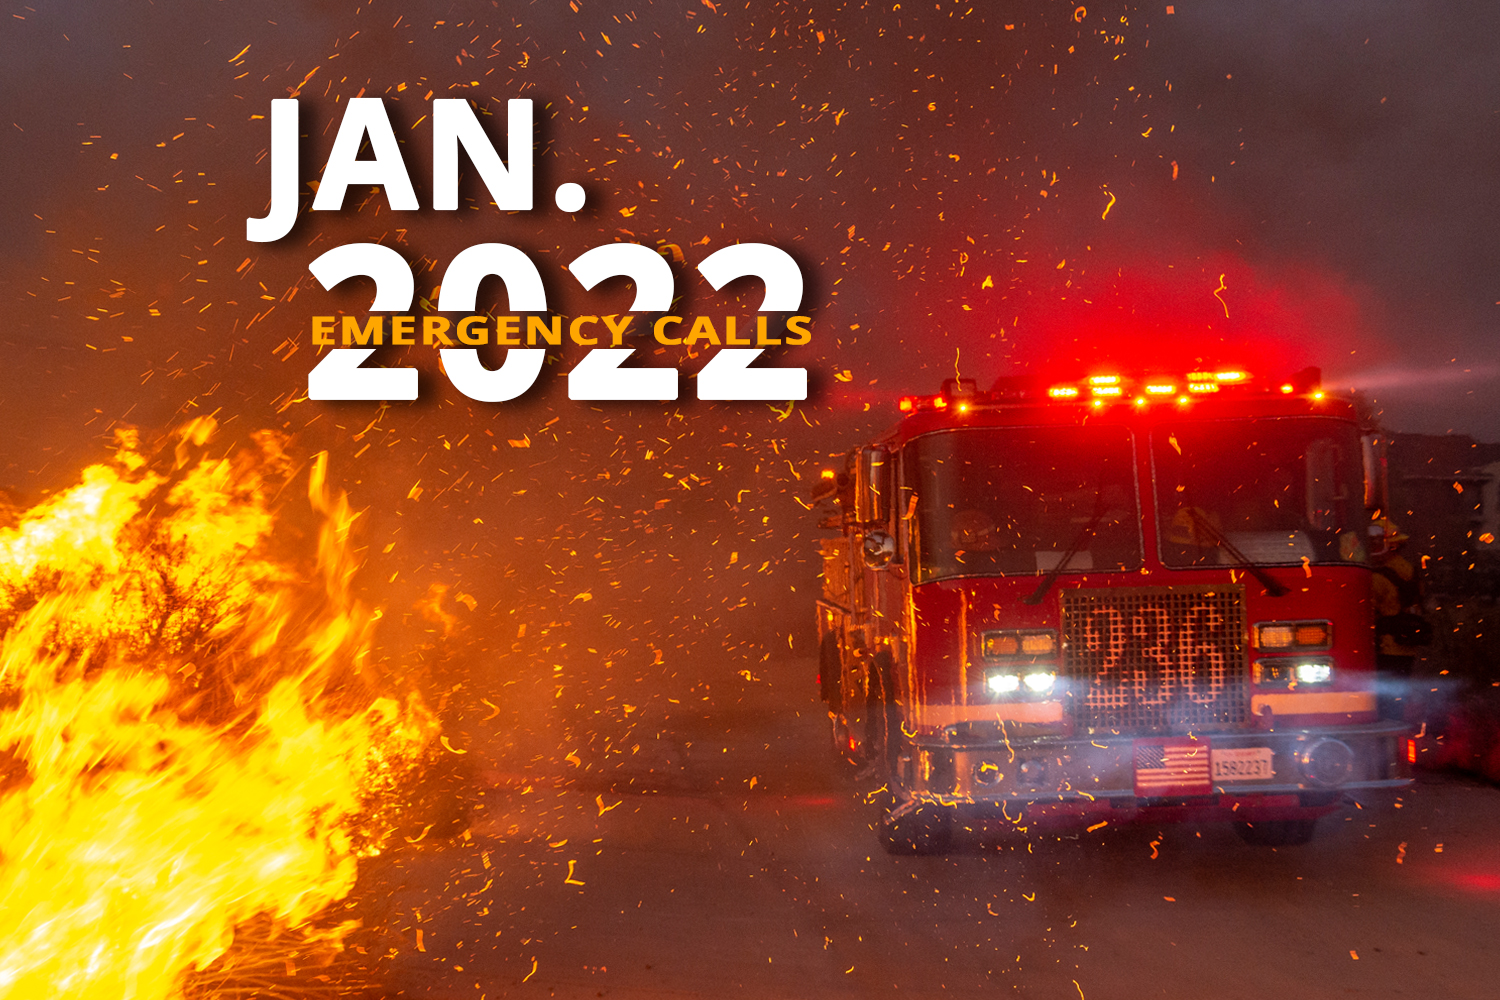 The Los Angeles County Fire Department (LACoFD) rang in the new year with record breaking emergency calls! January 2022 was the Department's busiest month of all time.